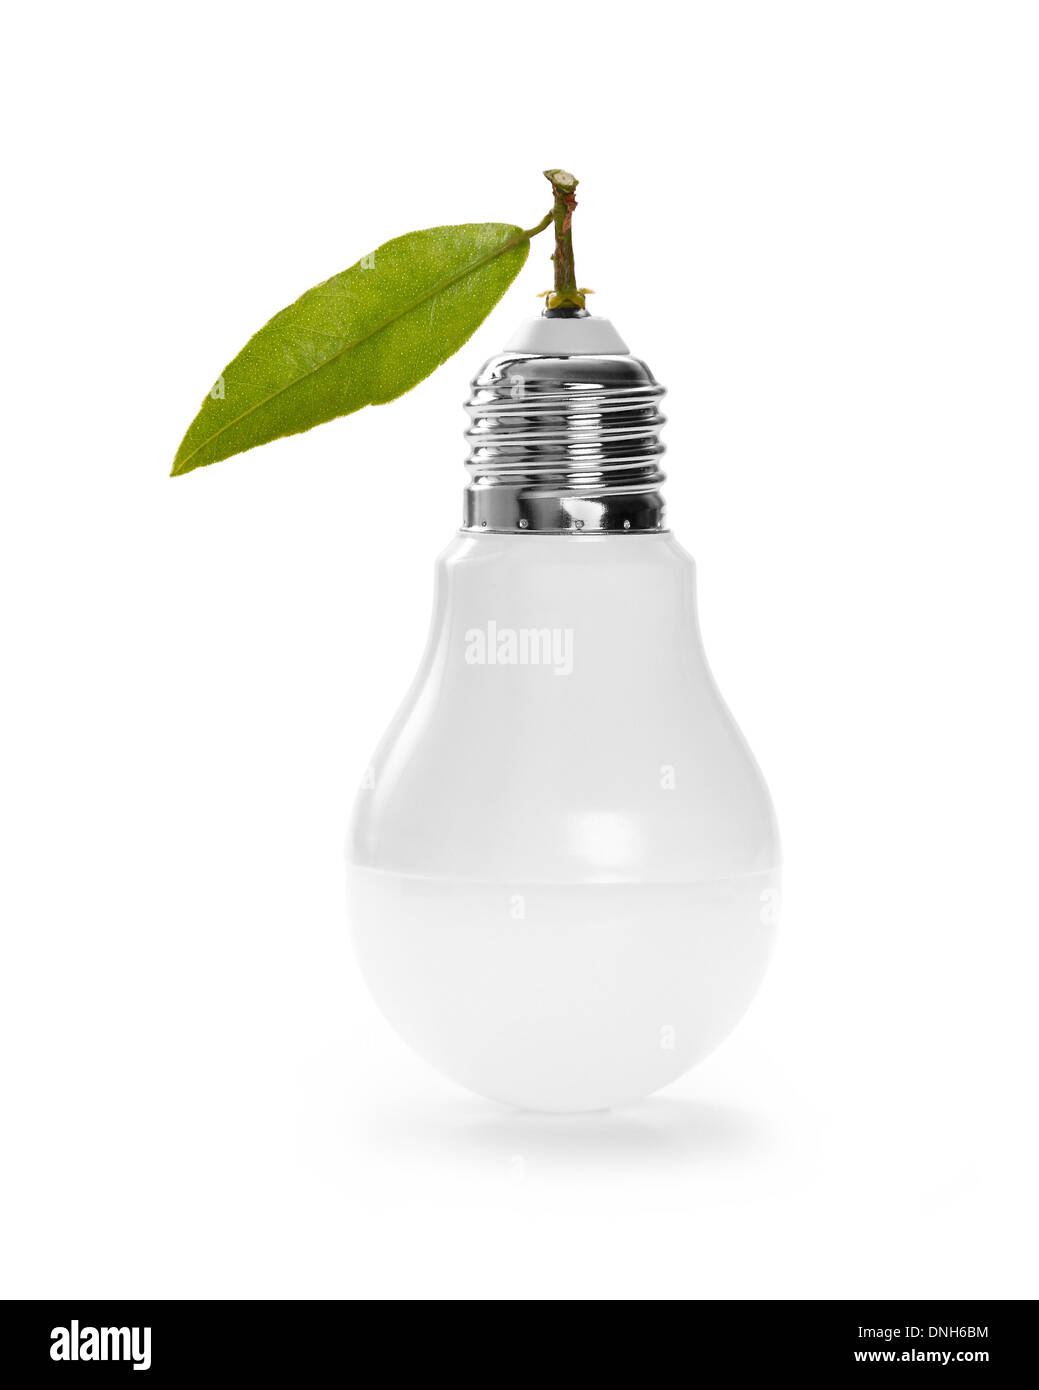 LED lamp with green leaf, ECO energy concept, close up Stock Photo